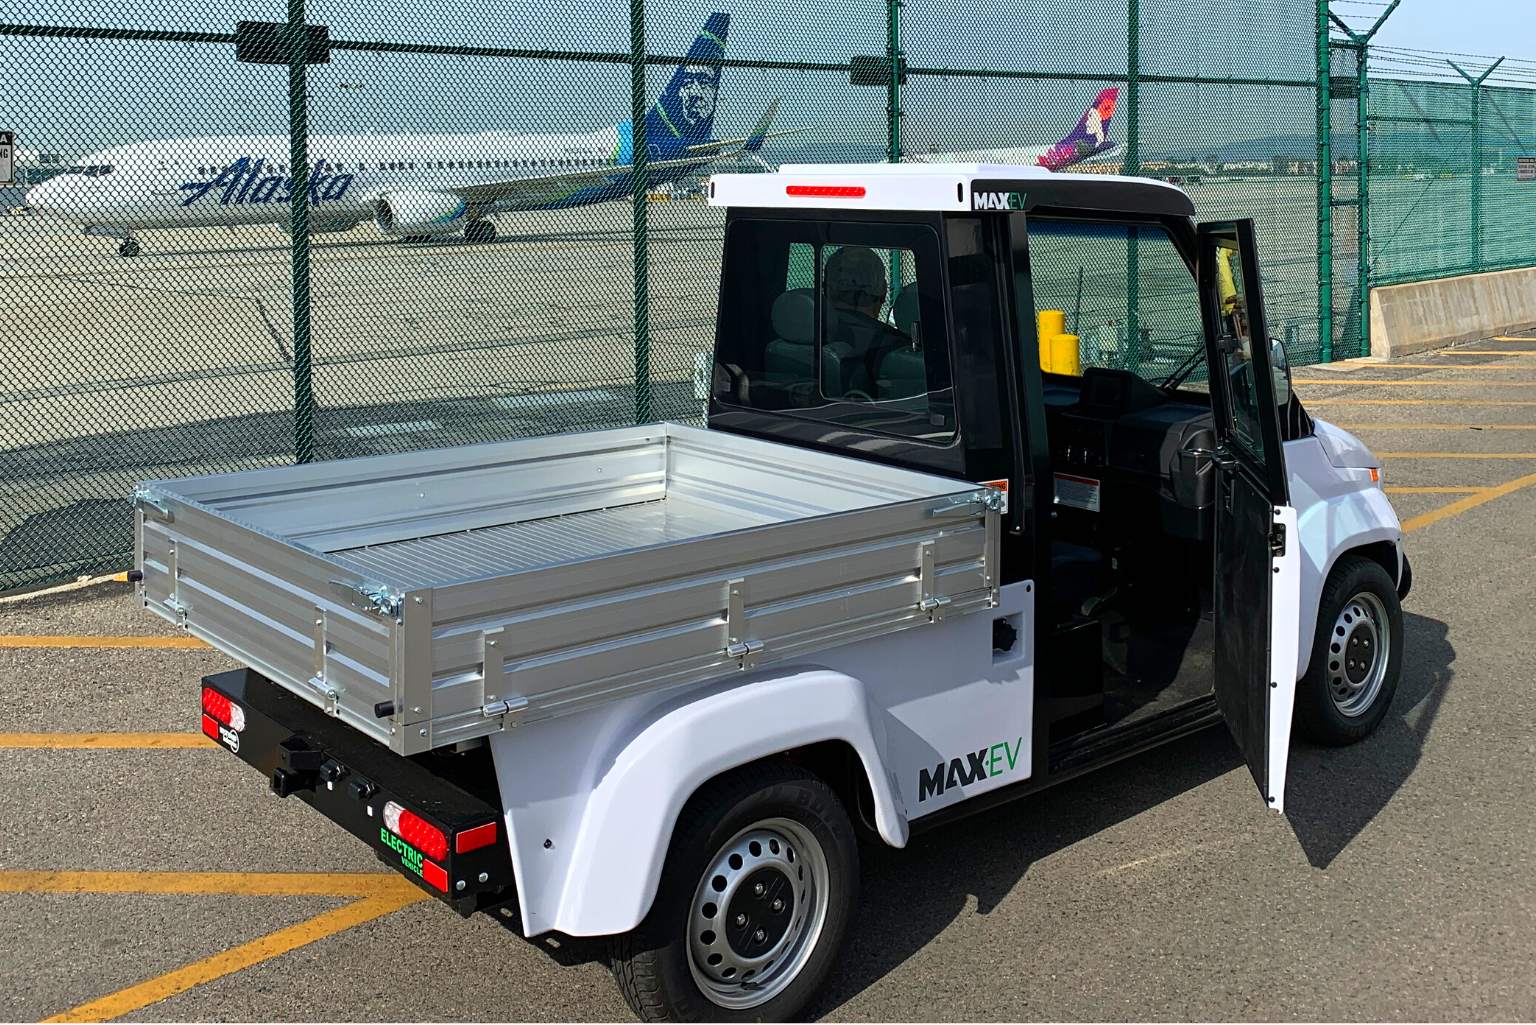 Reduce fleet cost with the MAX-EV electric utility vehicle